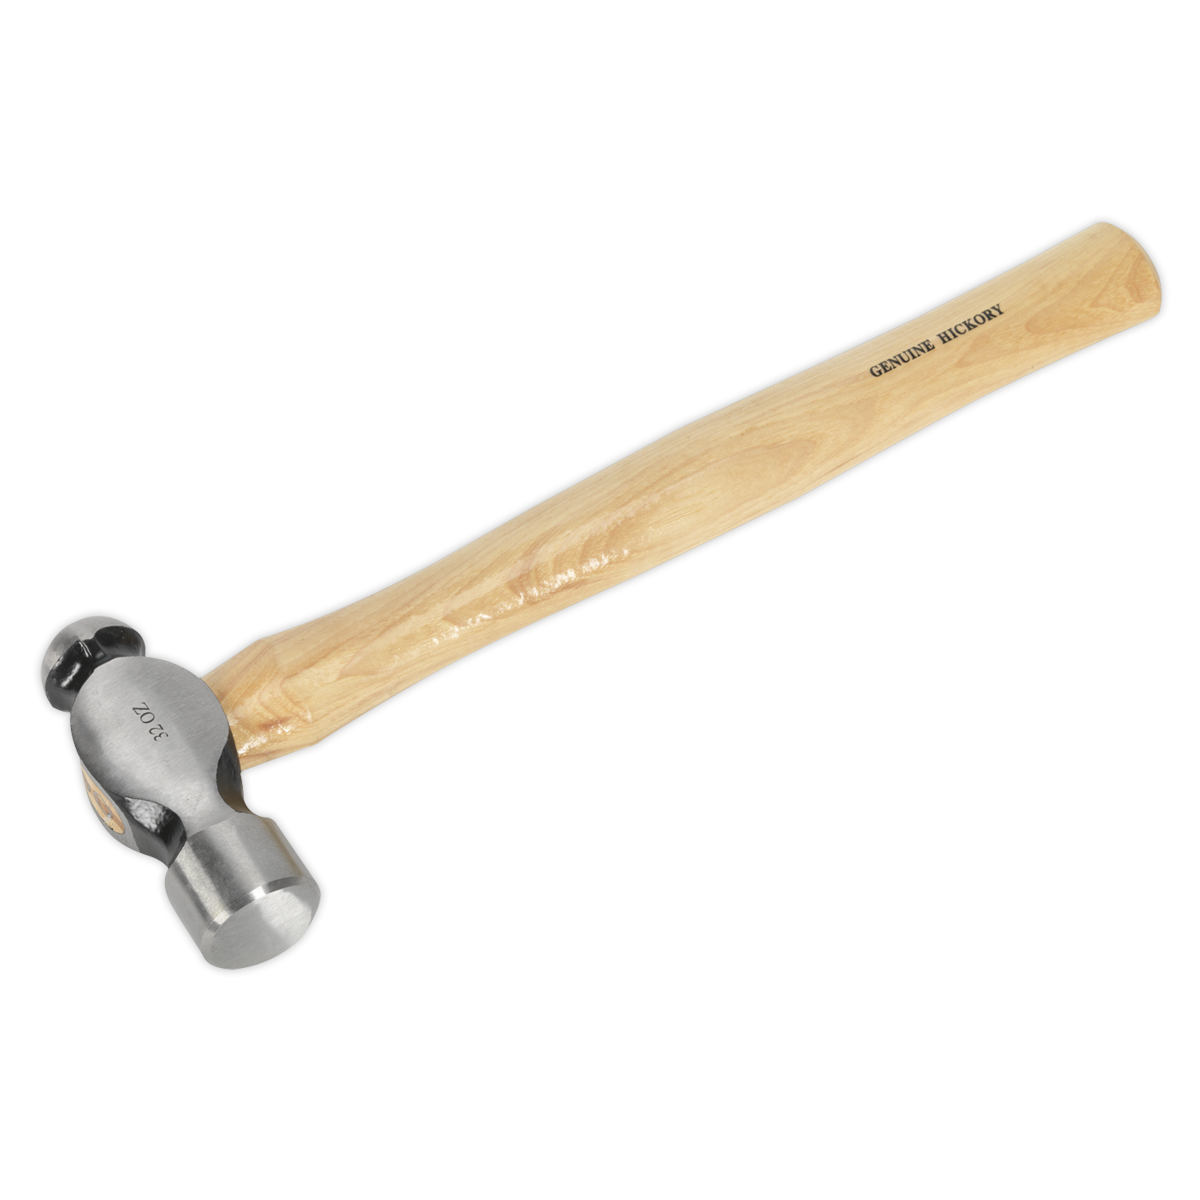 Sealey Ball Pein Hammer 2lb Hickory Shaft BPH32 | Drop-forged steel head and fitted with straight-grained hickory shaft. | toolforce.ie